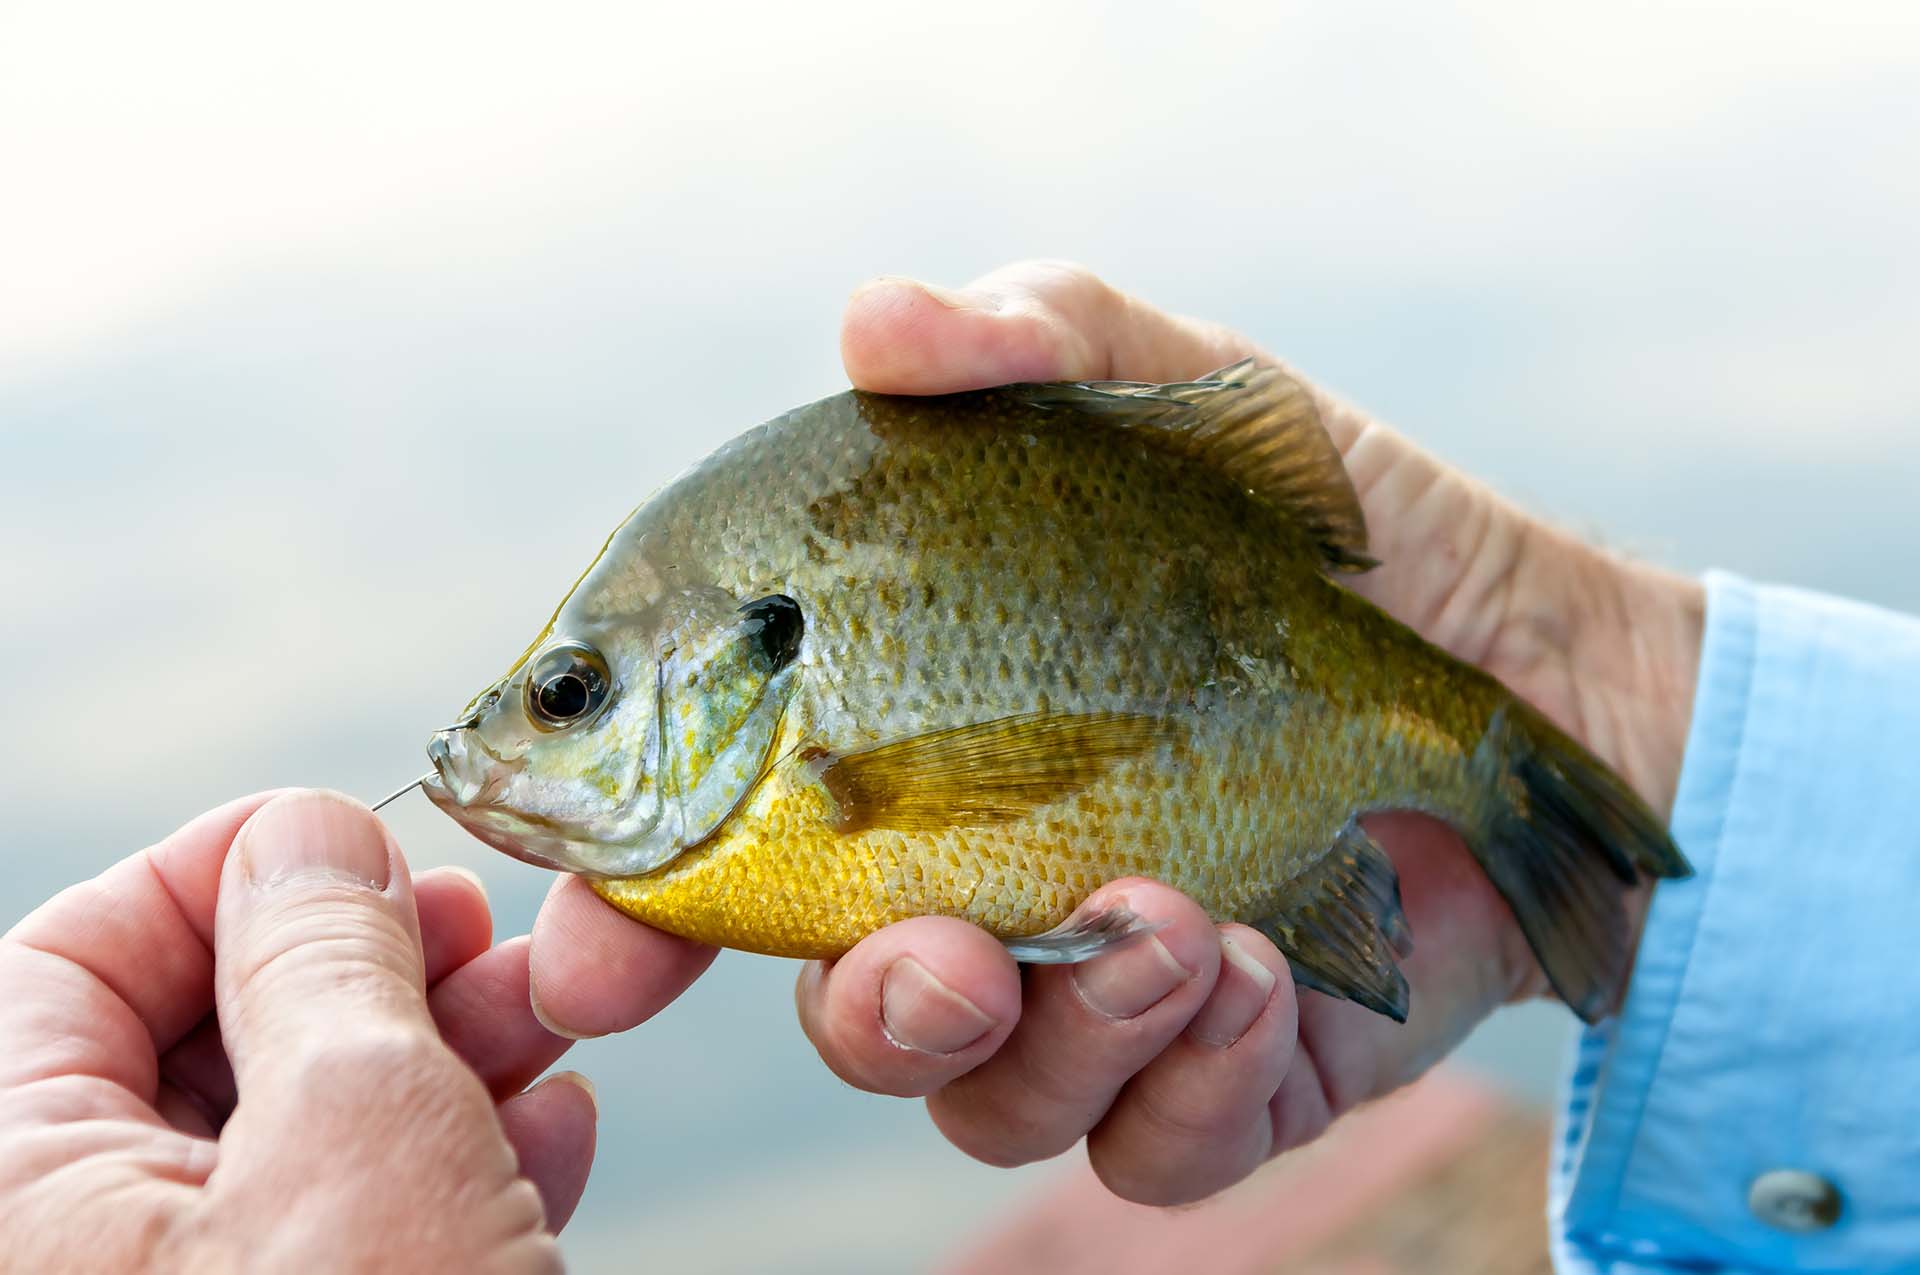 Person holding sunfish in hands and removing the fish hook